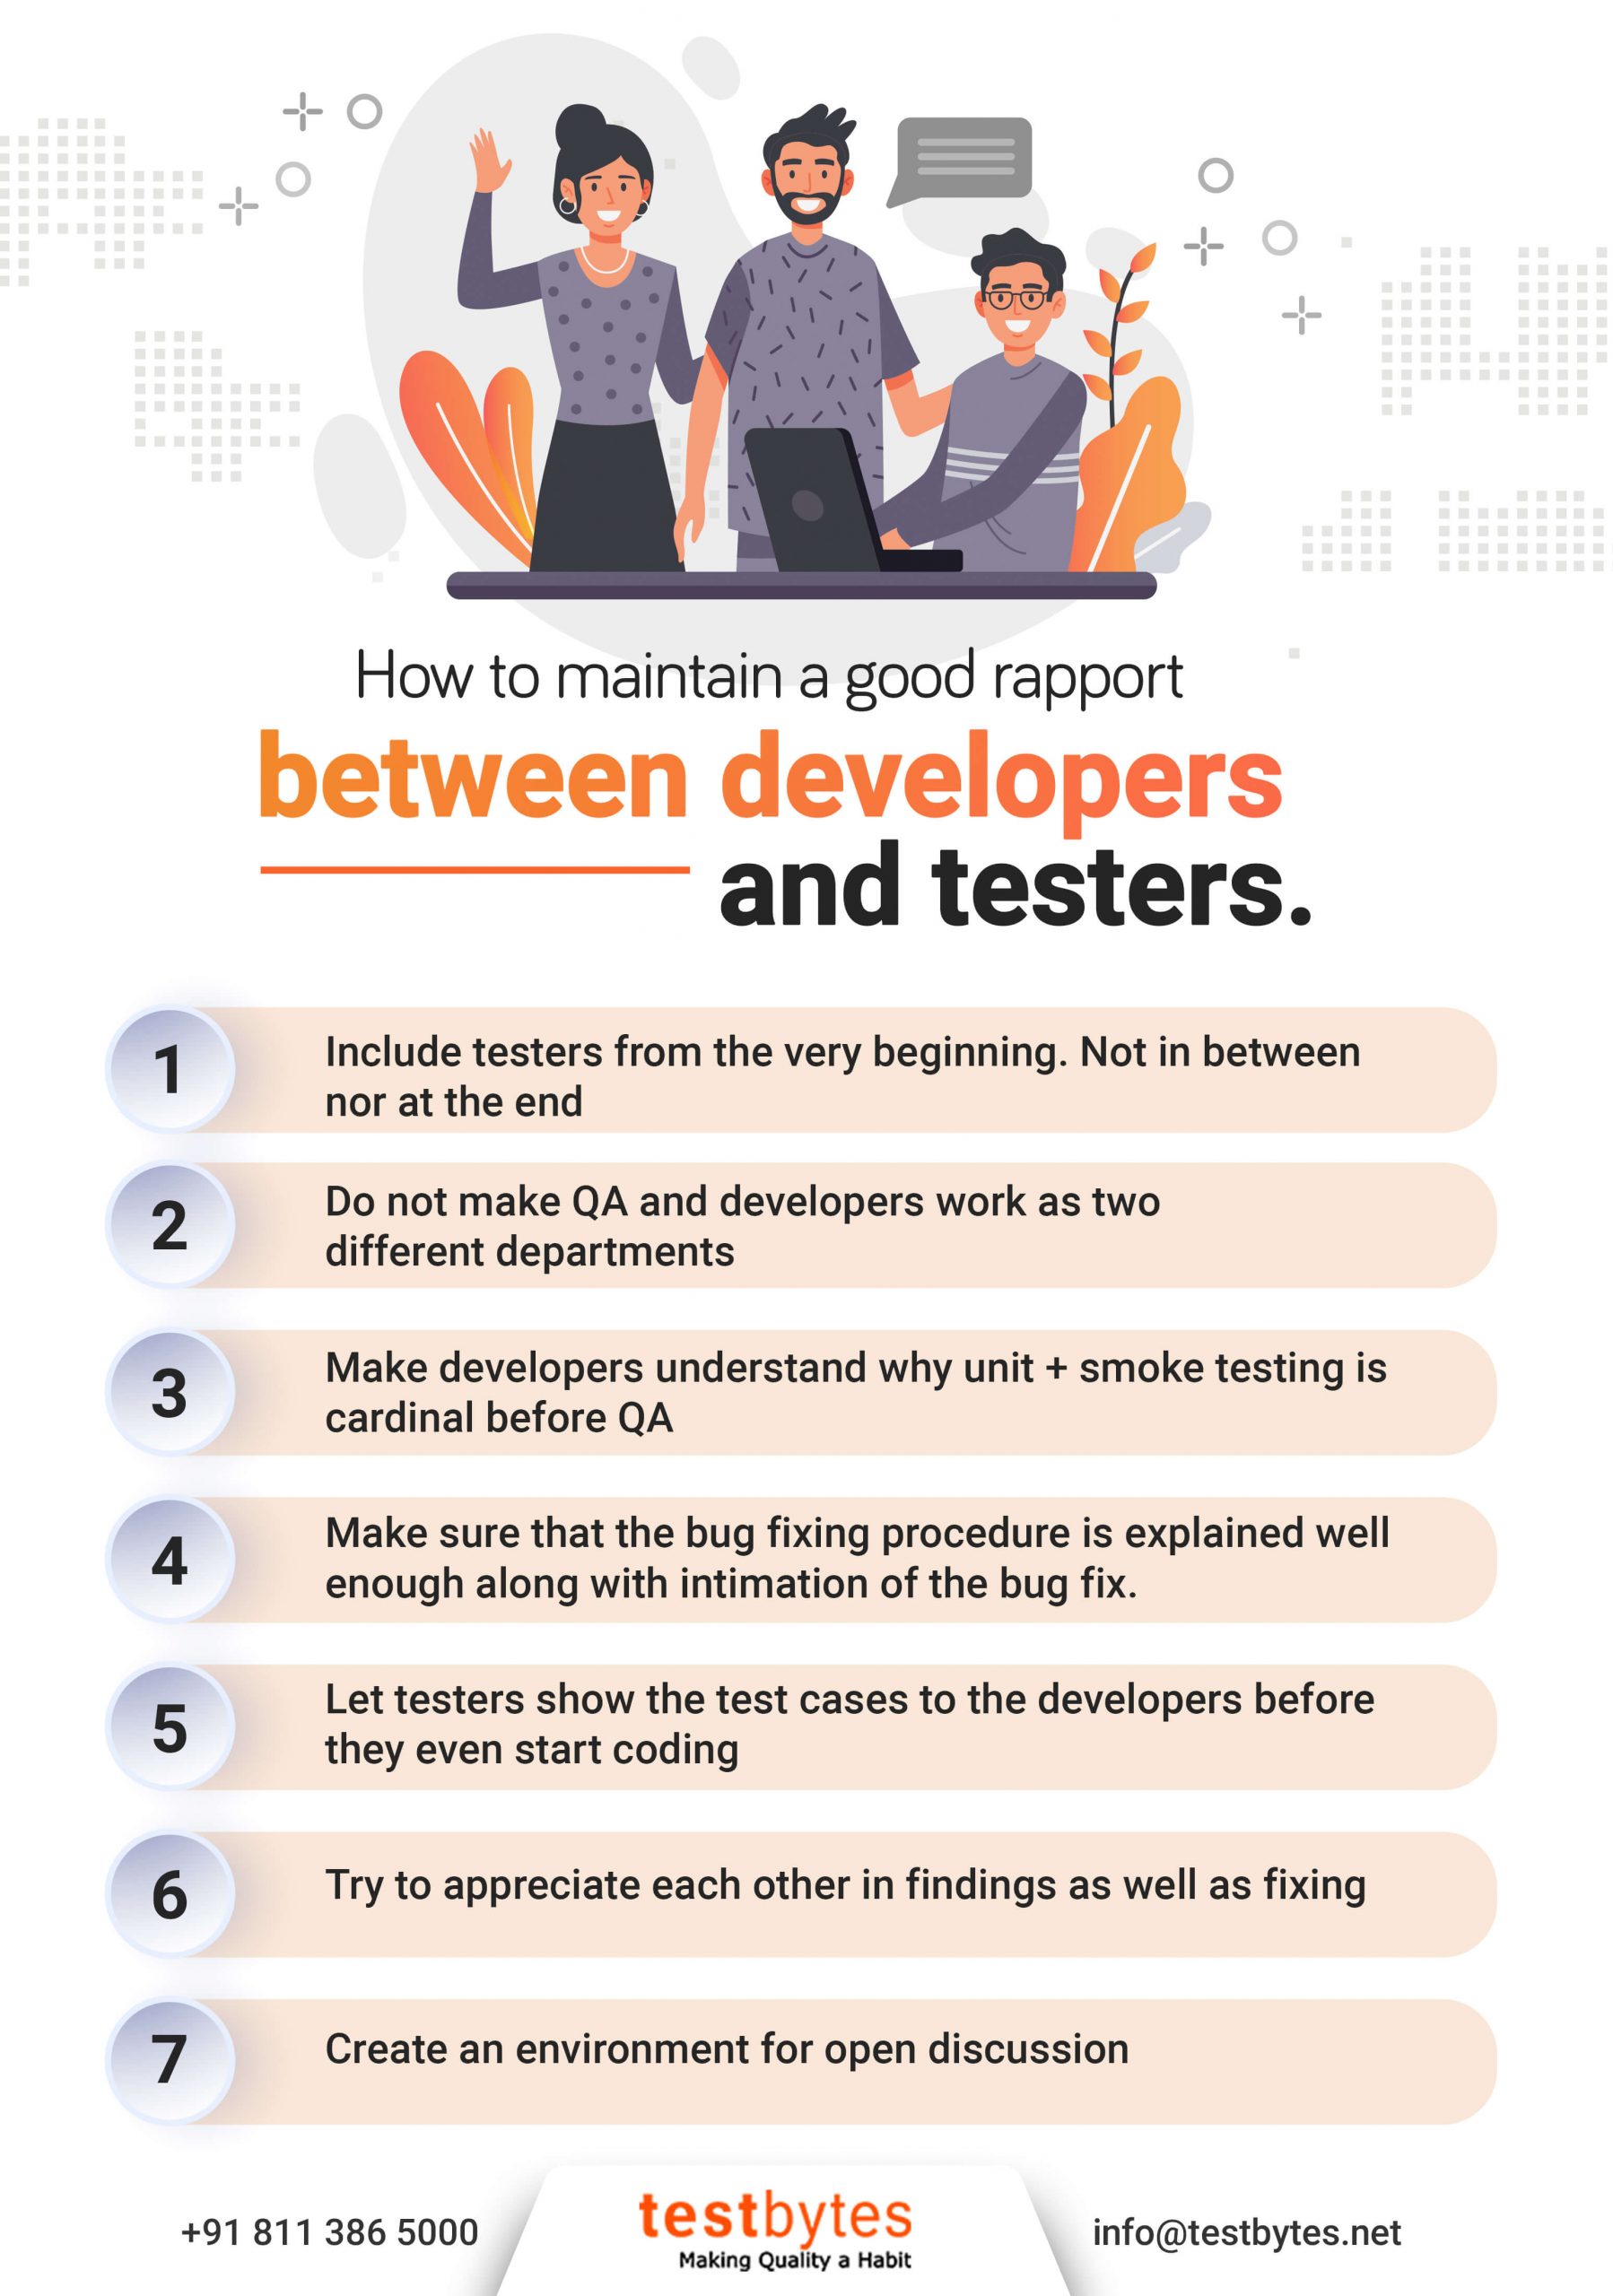 How-to-maintain-a-good-rapport-between-developers-and-testers